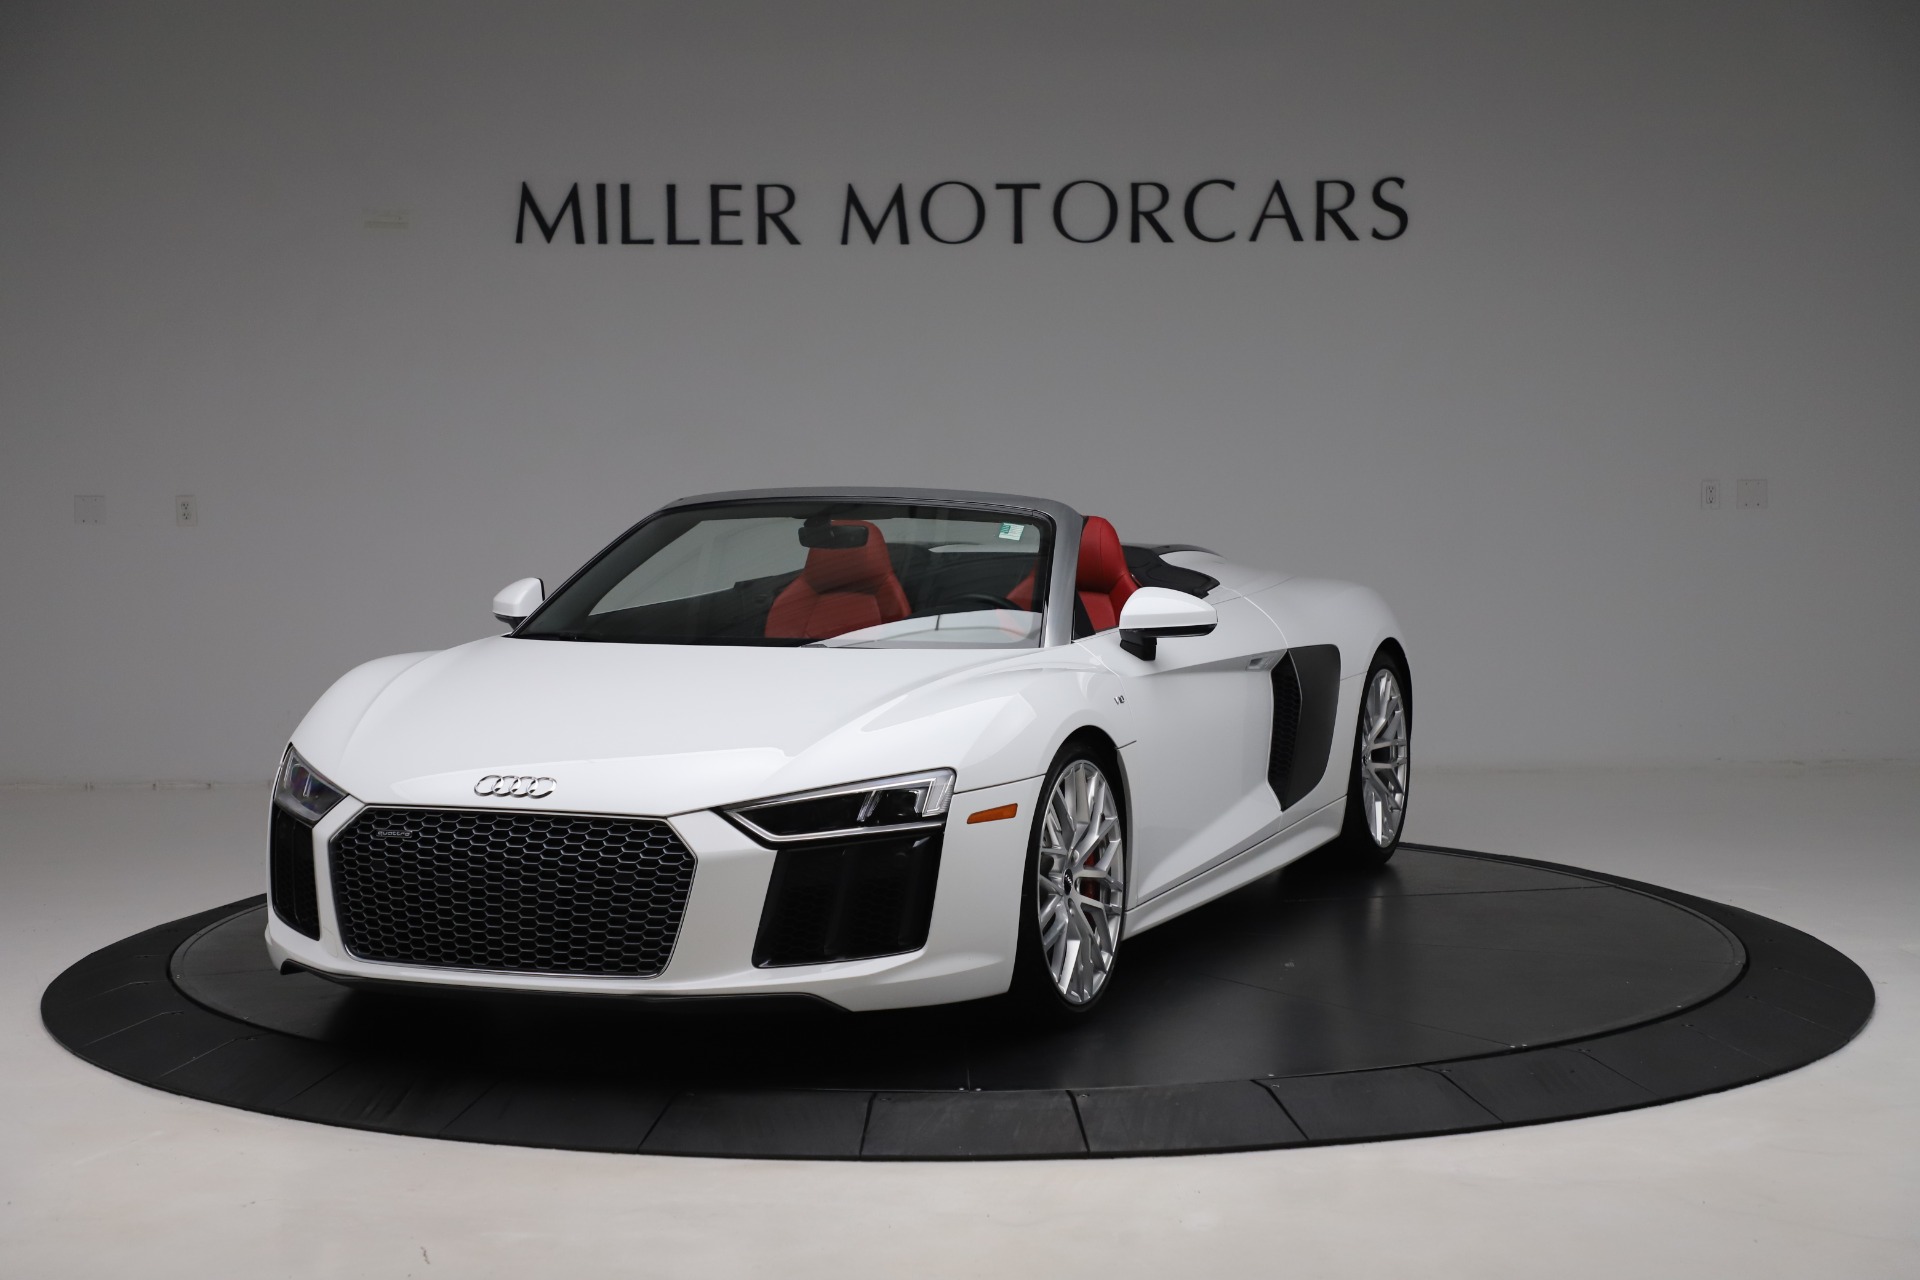 Used 2017 Audi R8 5.2 quattro V10 Spyder for sale Sold at Alfa Romeo of Greenwich in Greenwich CT 06830 1